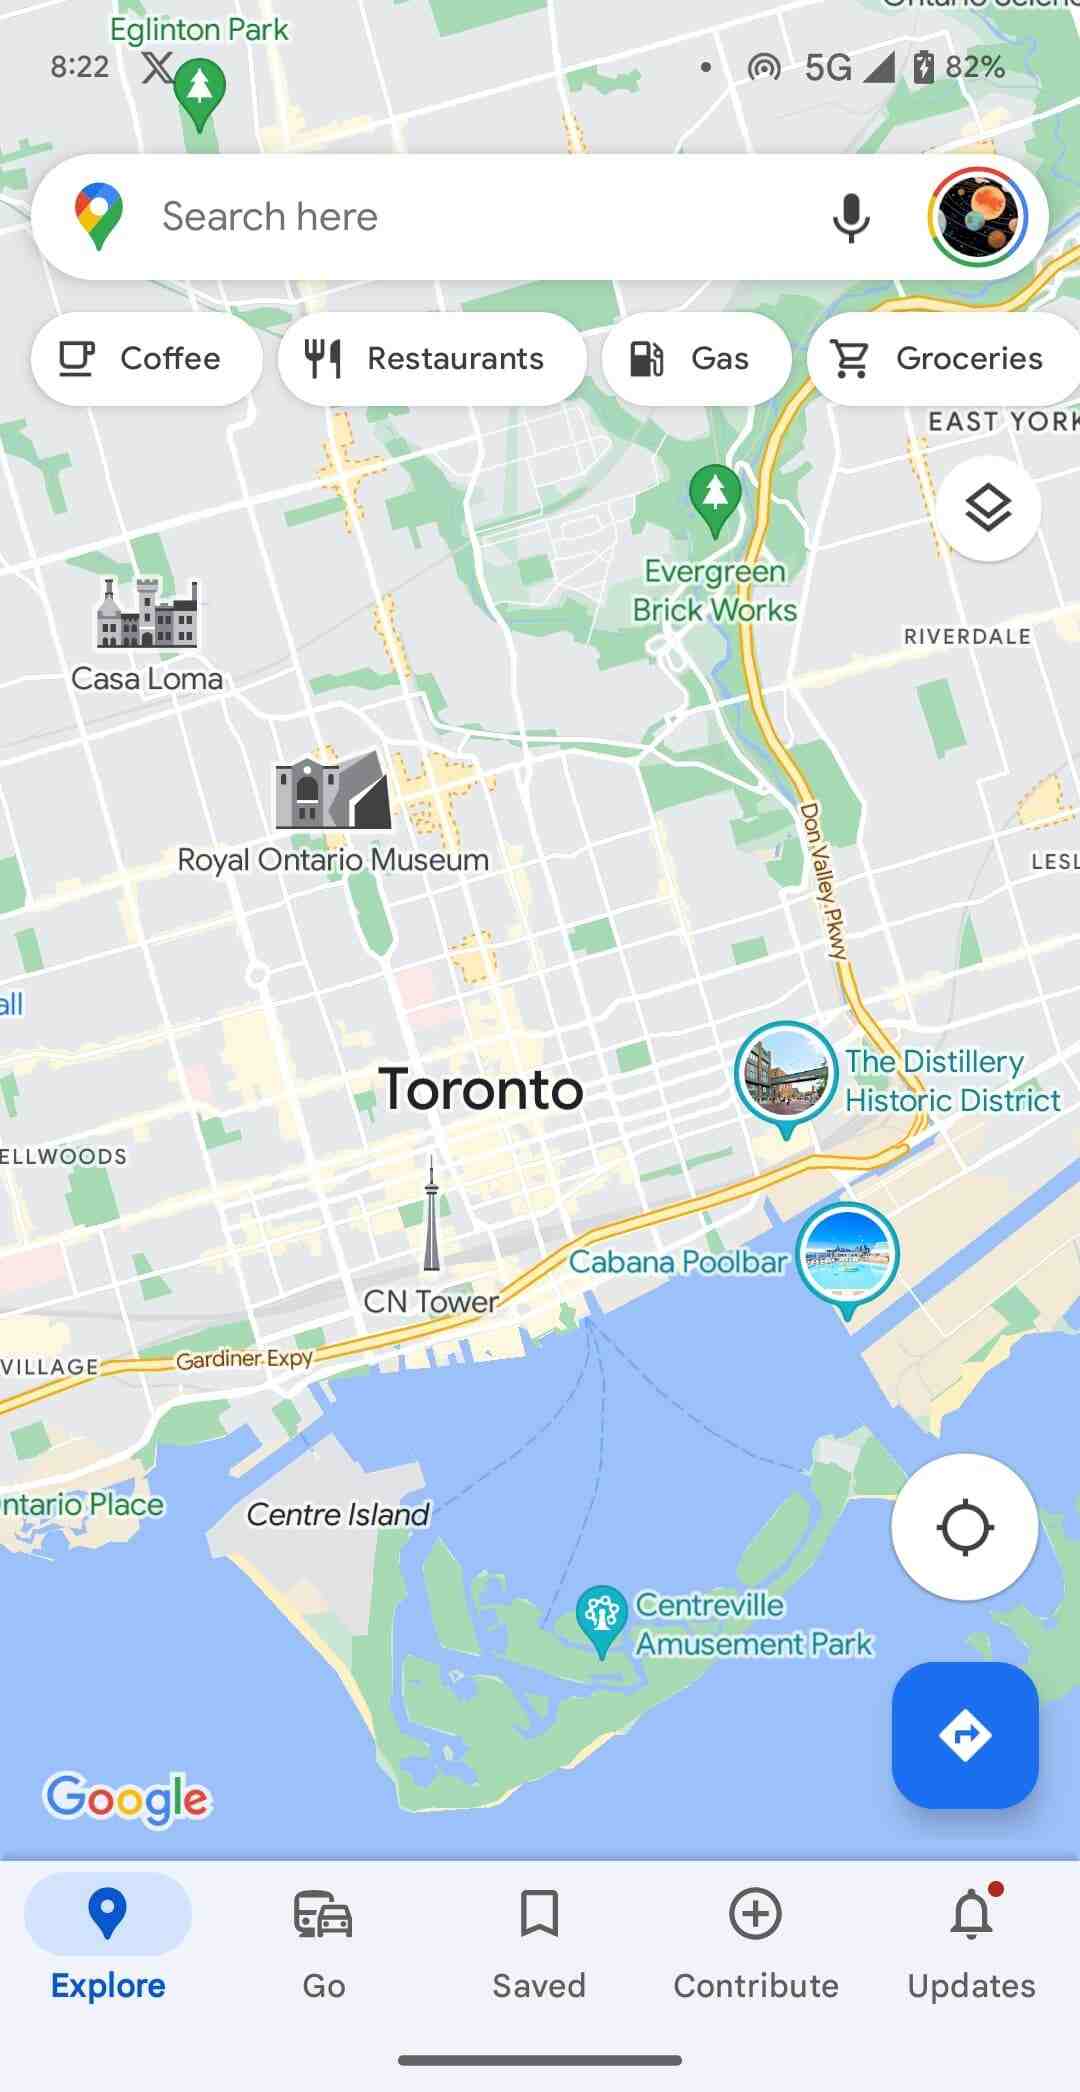 Google Maps gets a new UI design with improved colors